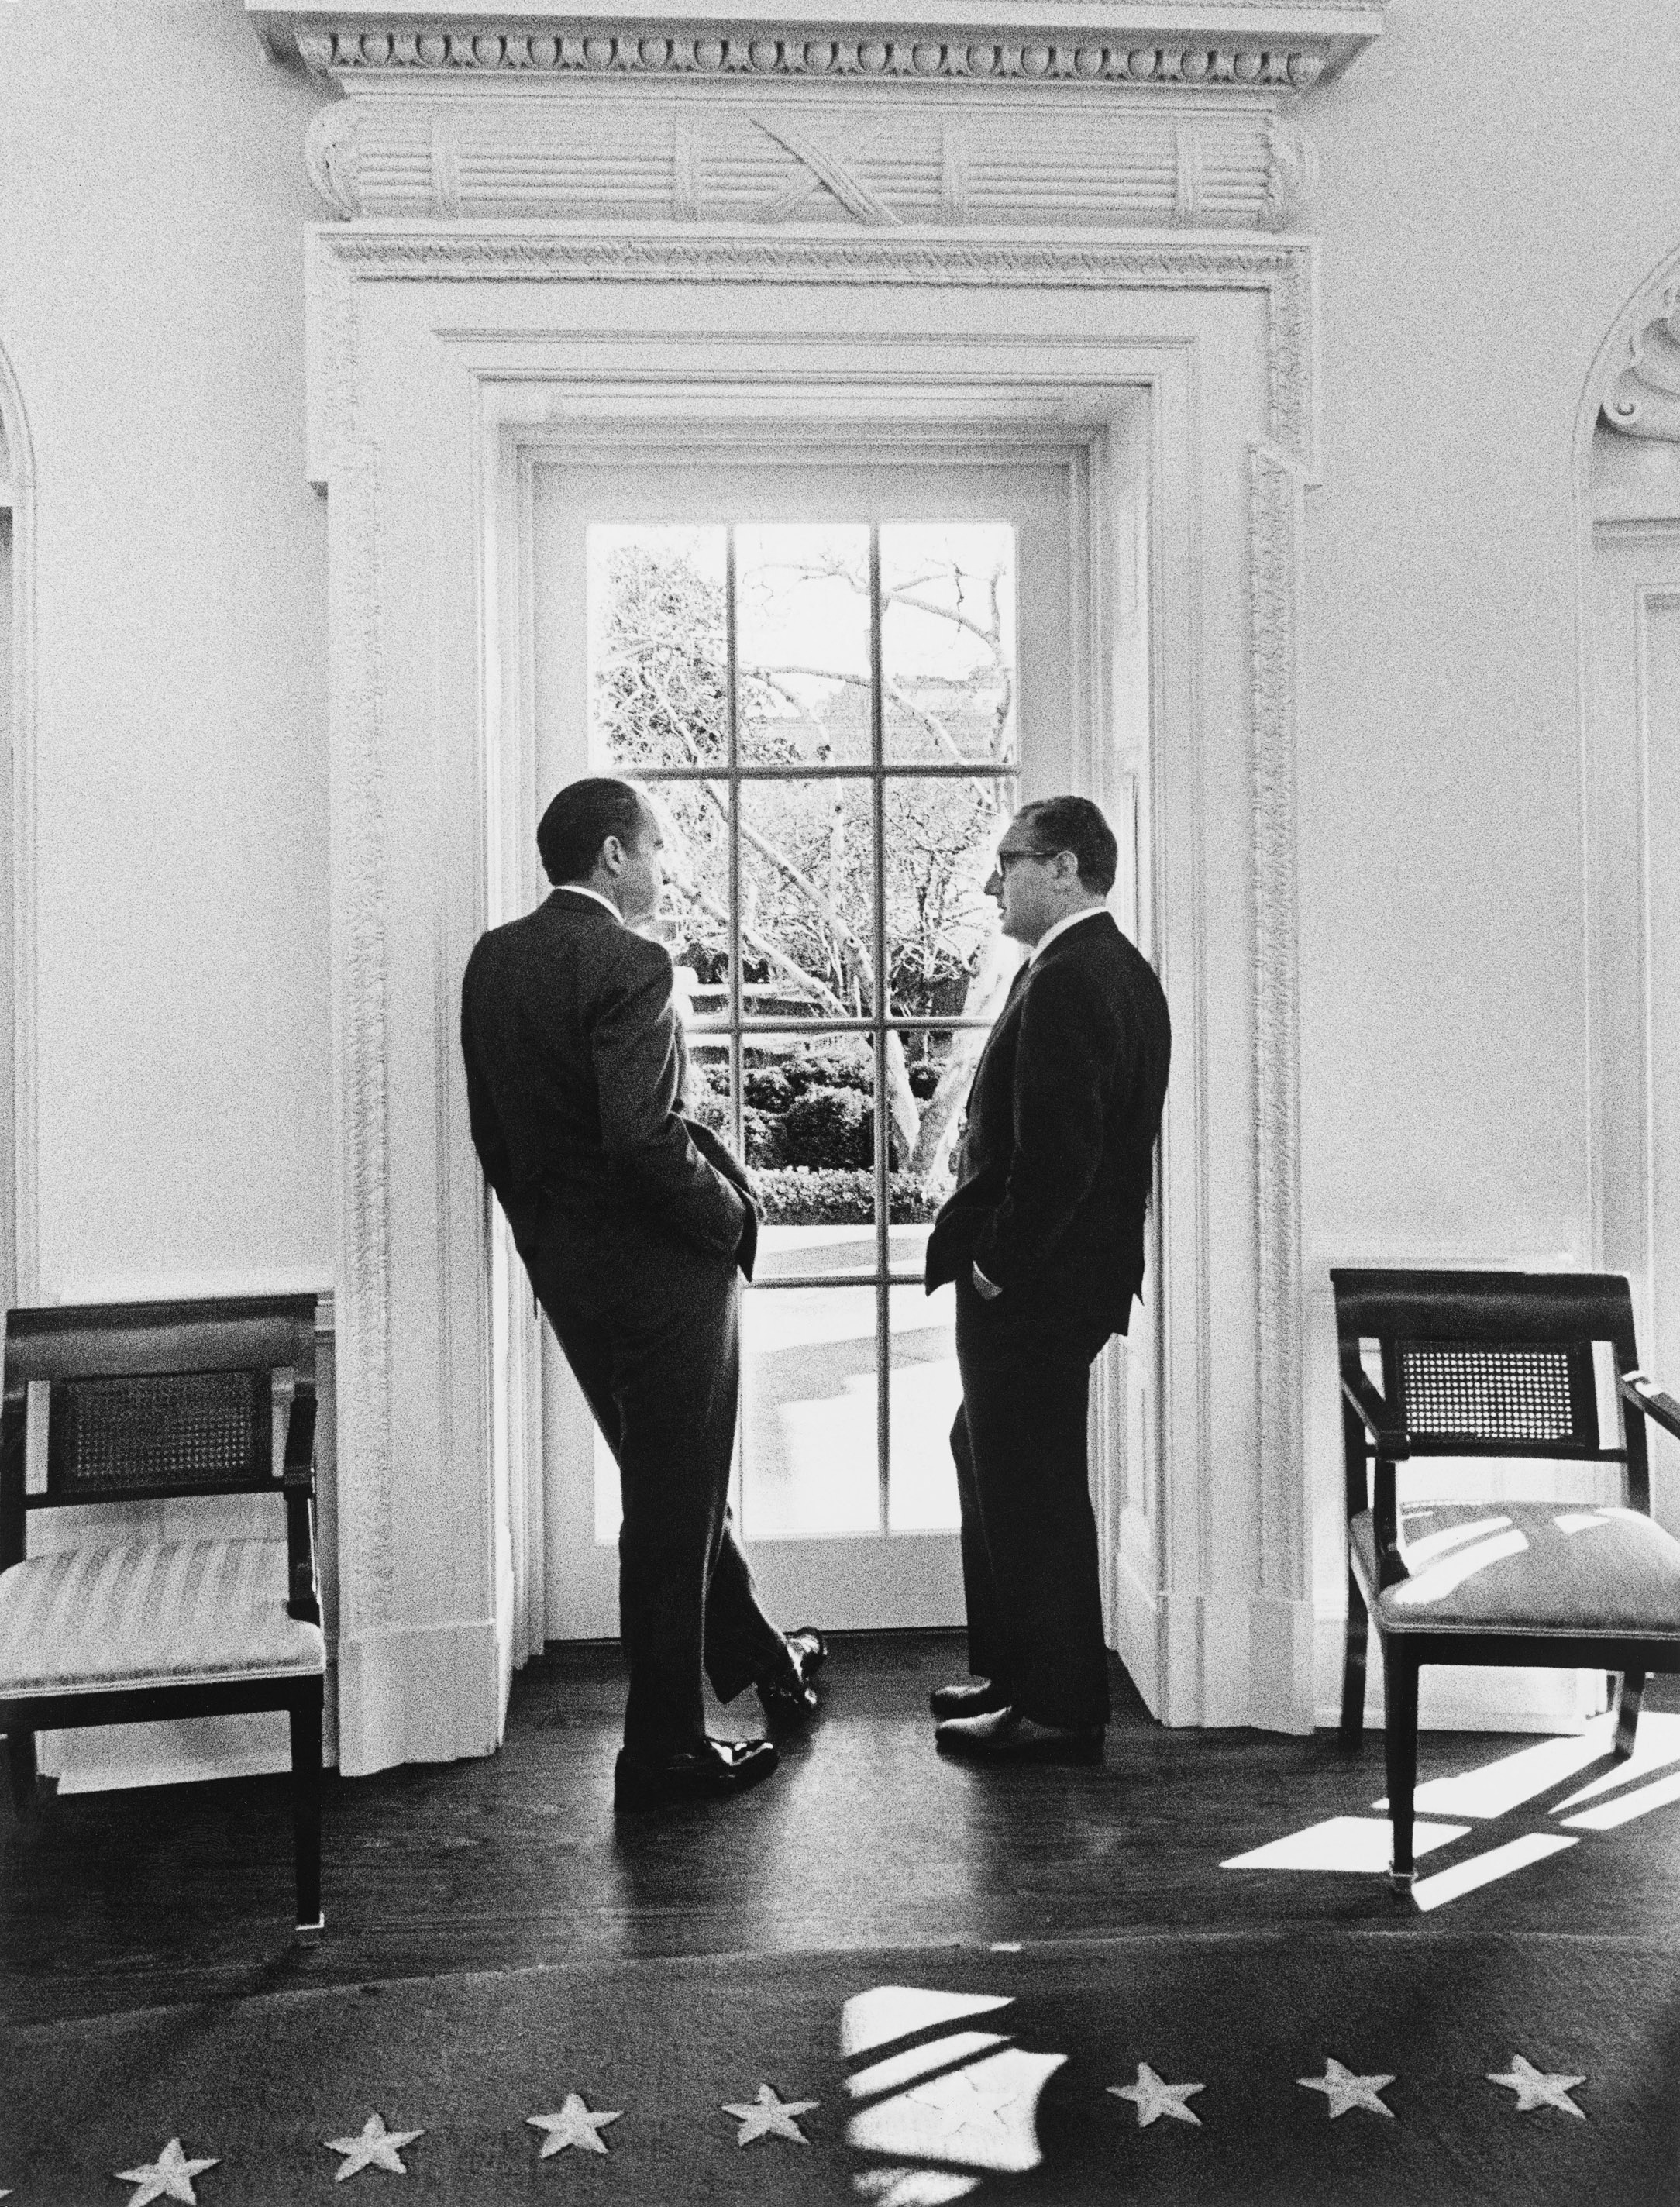 U.S. President Richard Nixon and Henry Kissinger stand by a window in the Oval Office, at the White House in Washington DC, U.S., February 10, 1971.  via Richard Nixon Museum and Library 